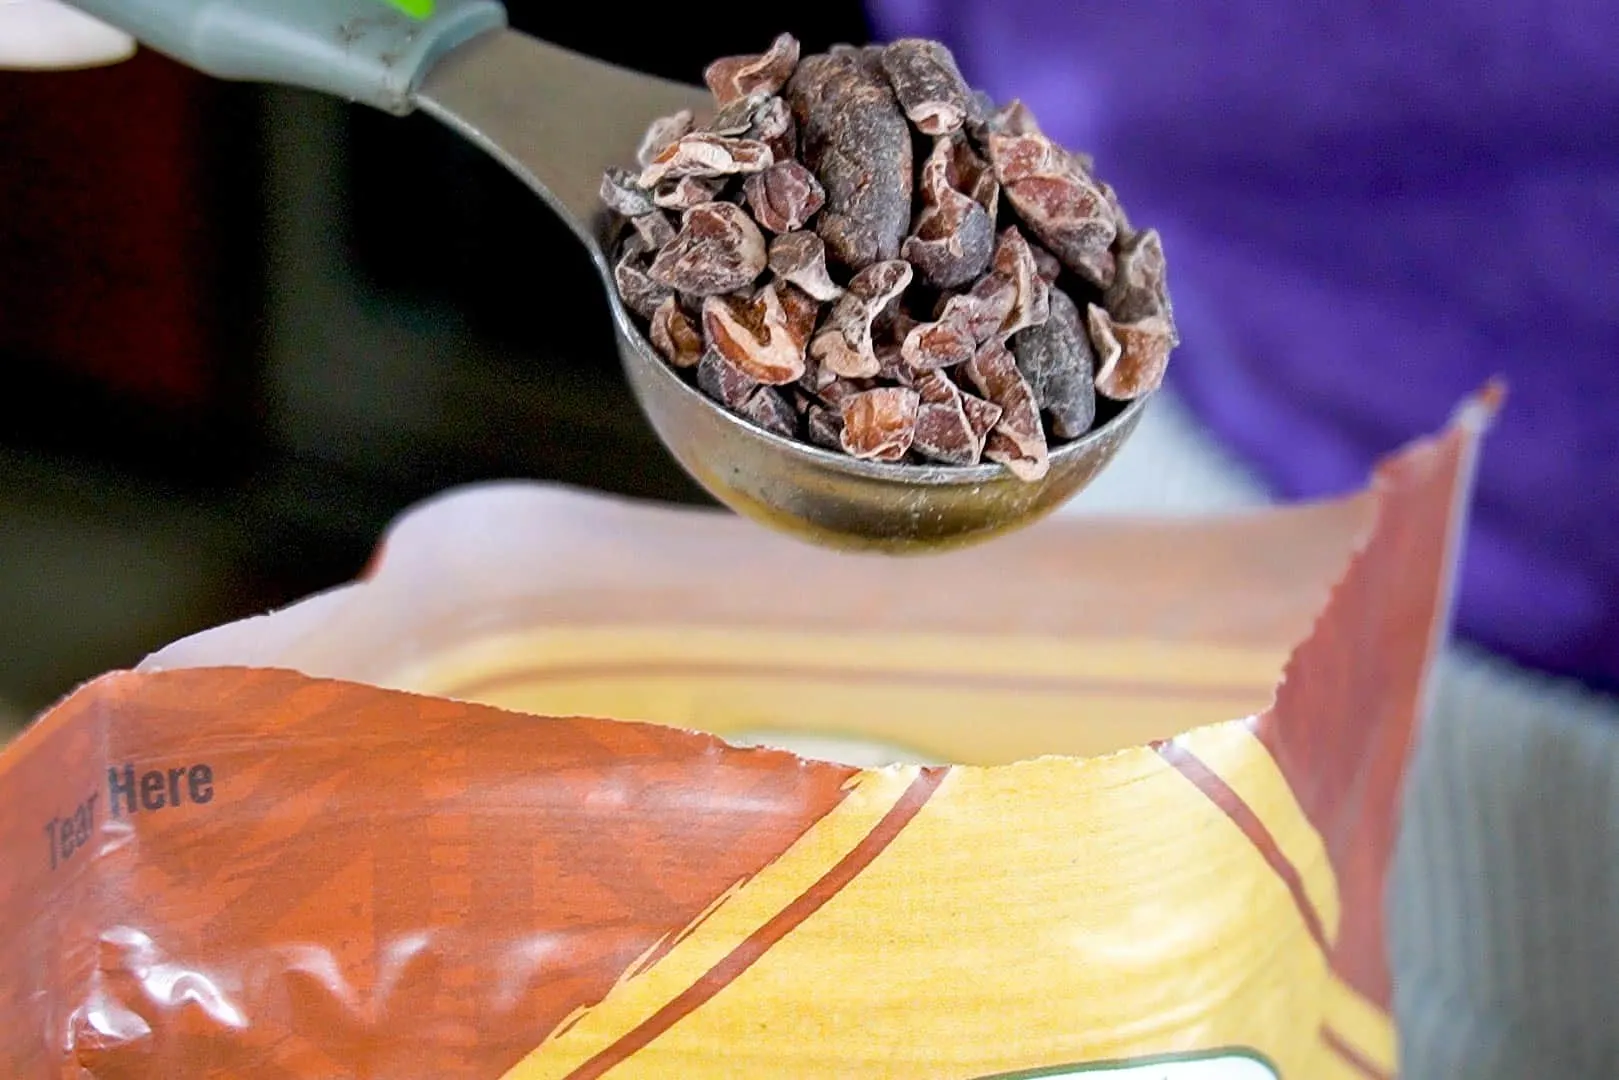 If cocoa beans Is So Terrible, Why Don't Statistics Show It?